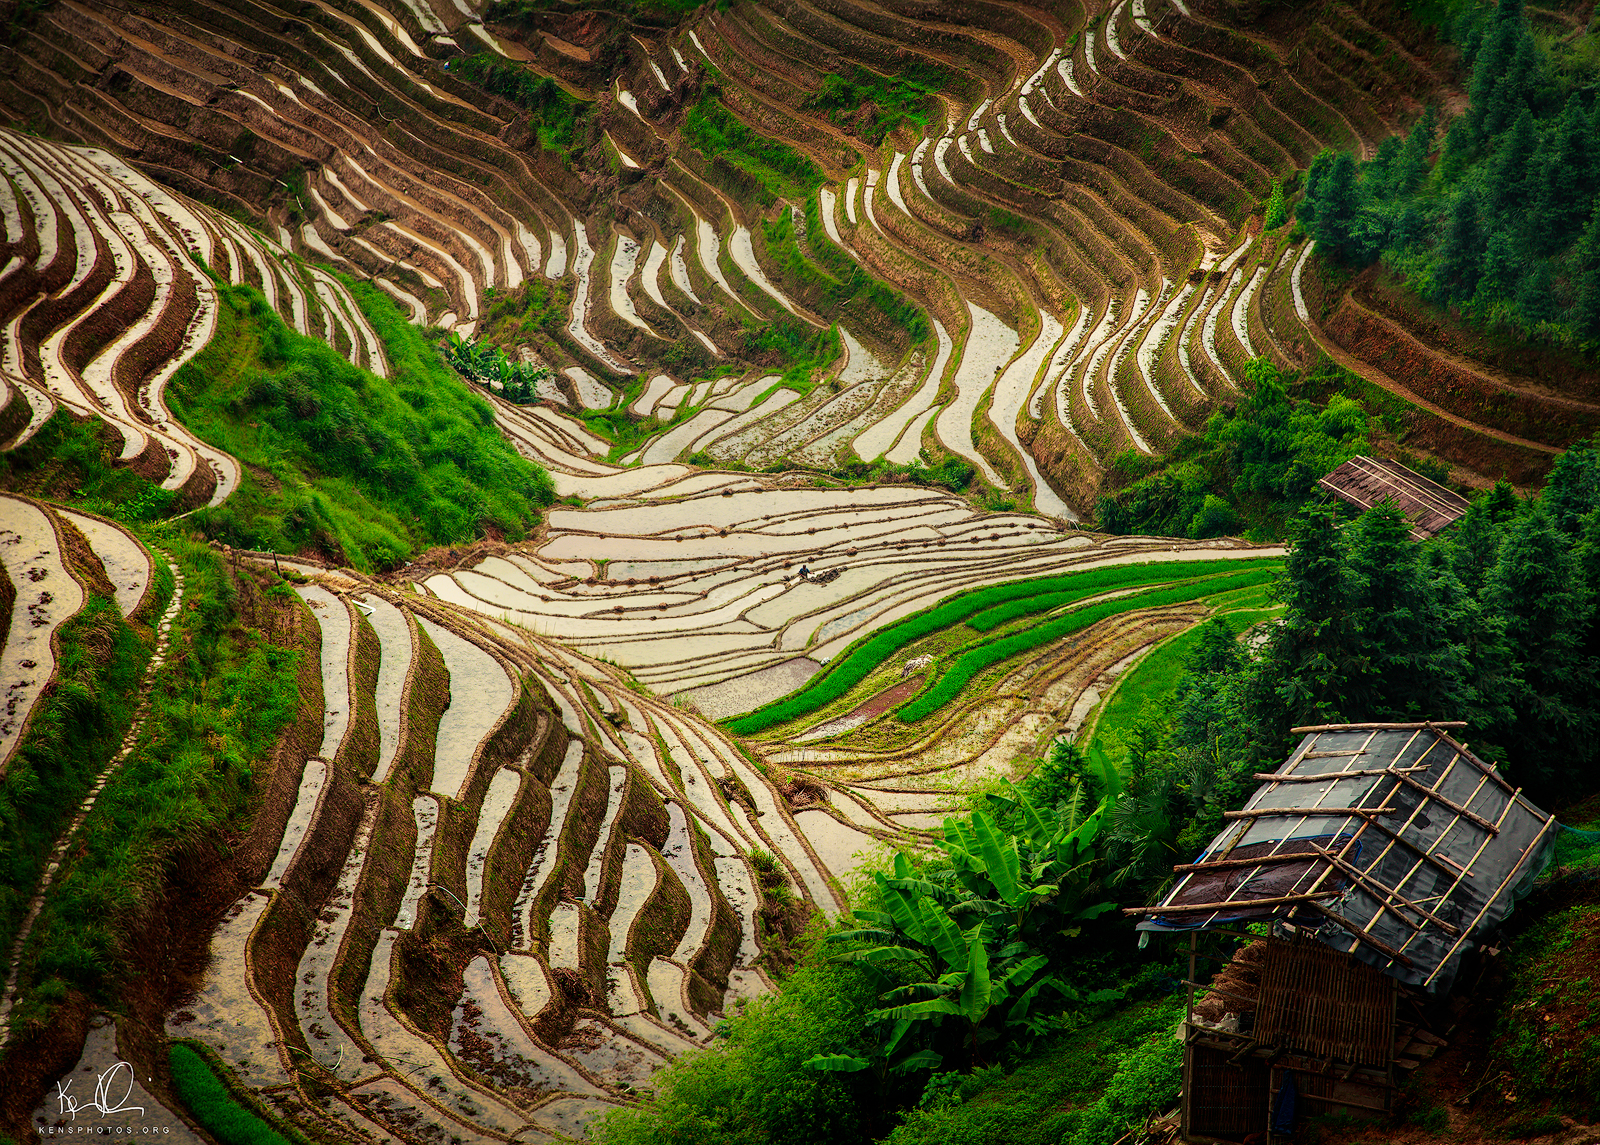   GUILIN CHINA. &nbsp;RICE TERRACES. &nbsp; CHECK OUT THE &nbsp;MAN IN &nbsp;THE MIDDLE. 